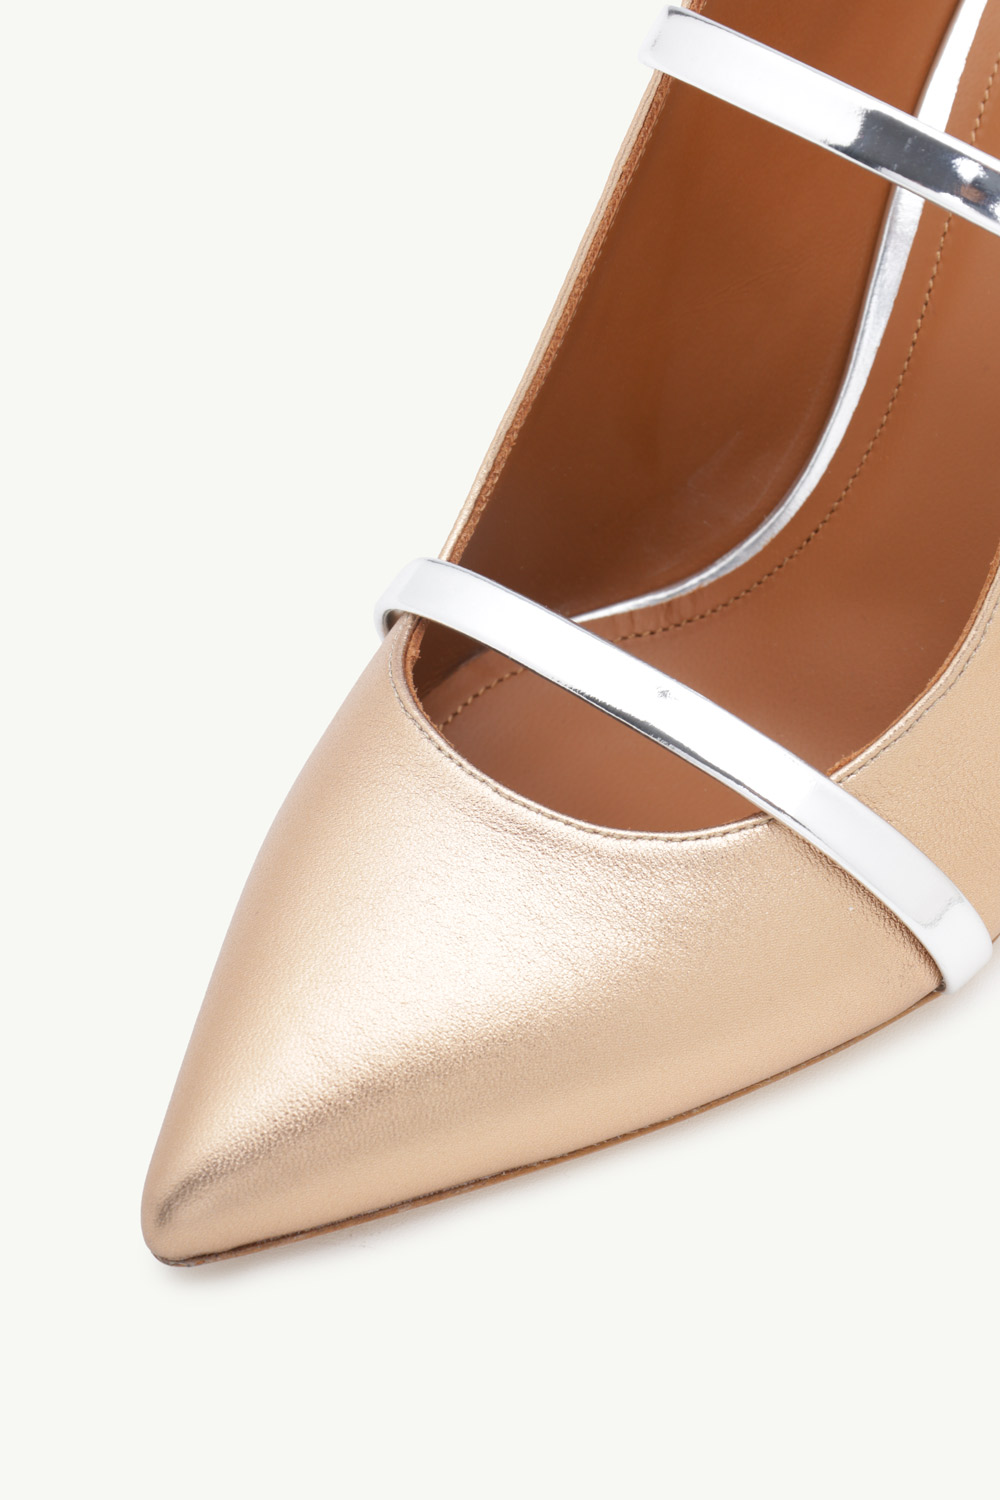 MALONE SOULIERS Maureen Pumps 70mm in Gold/Silver 4